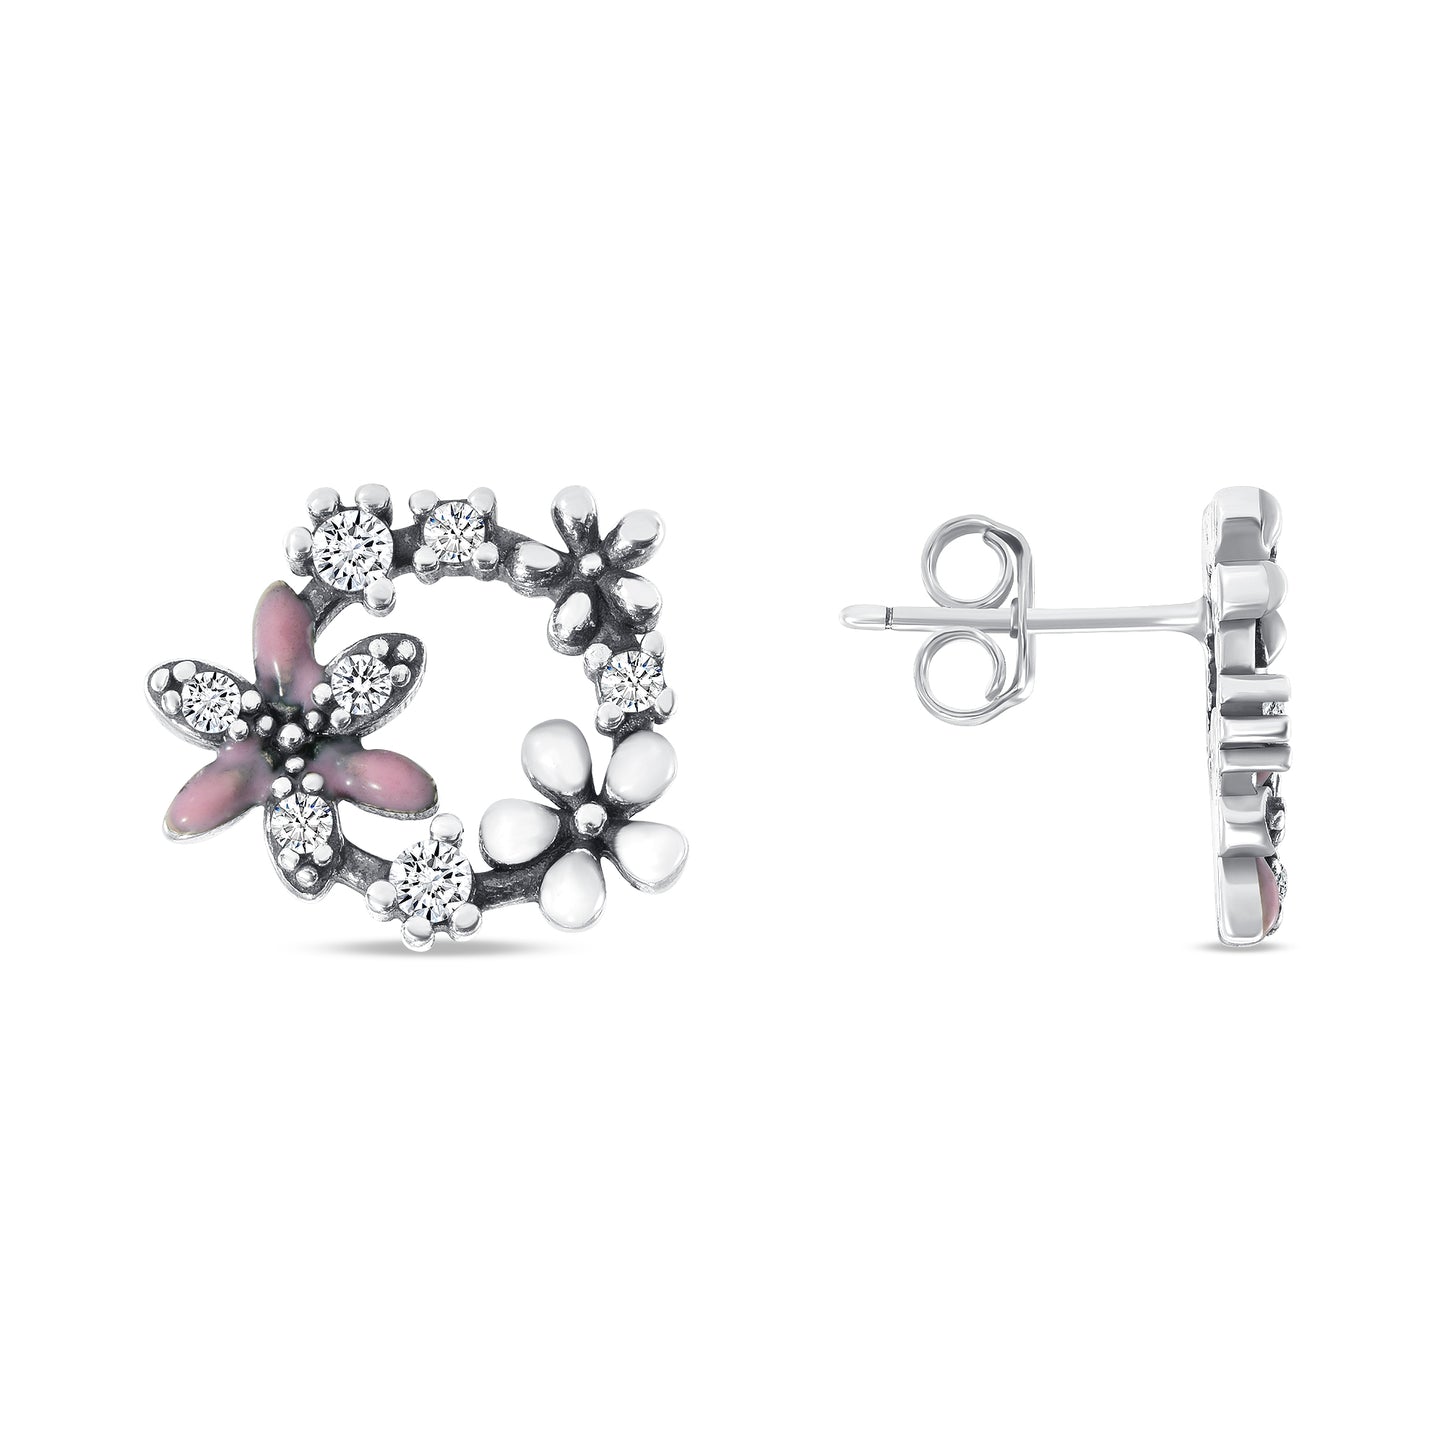 Silver 925 Rhodium Plated Pink and White Flower Cubic Zirconia Earring Stud. E1169